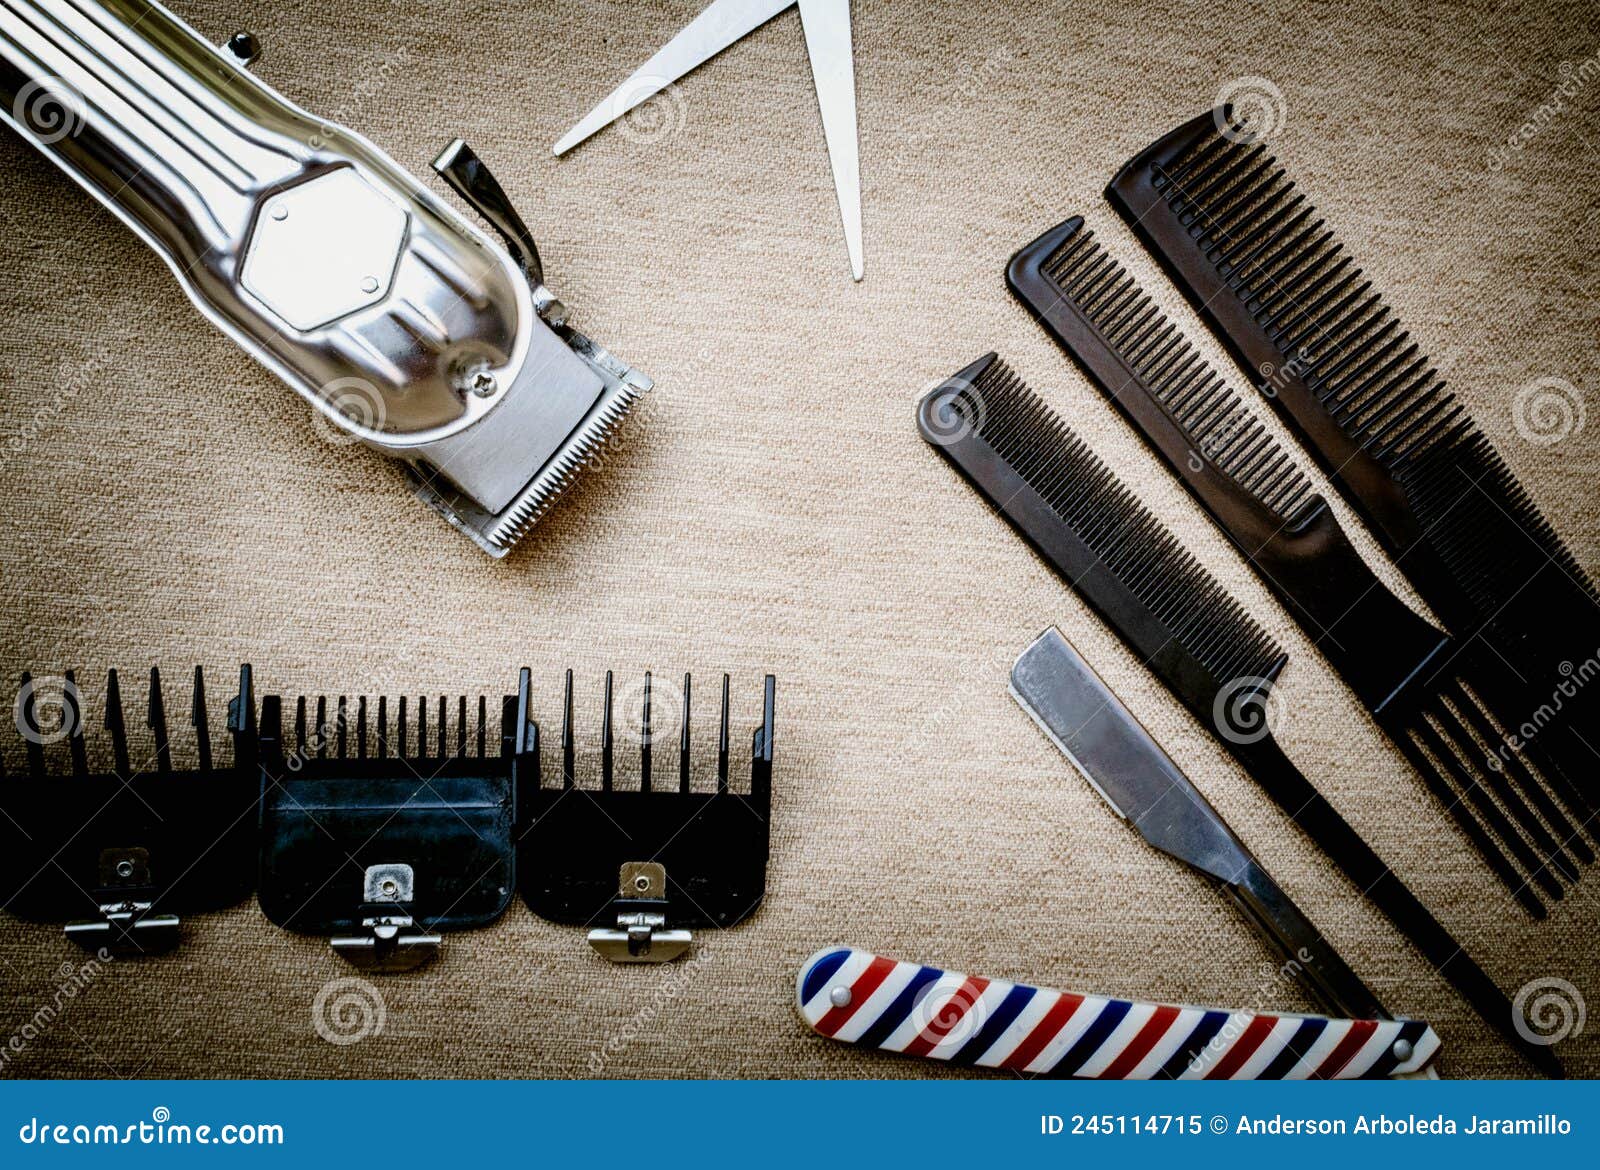 hairdressing tools for cutting hair